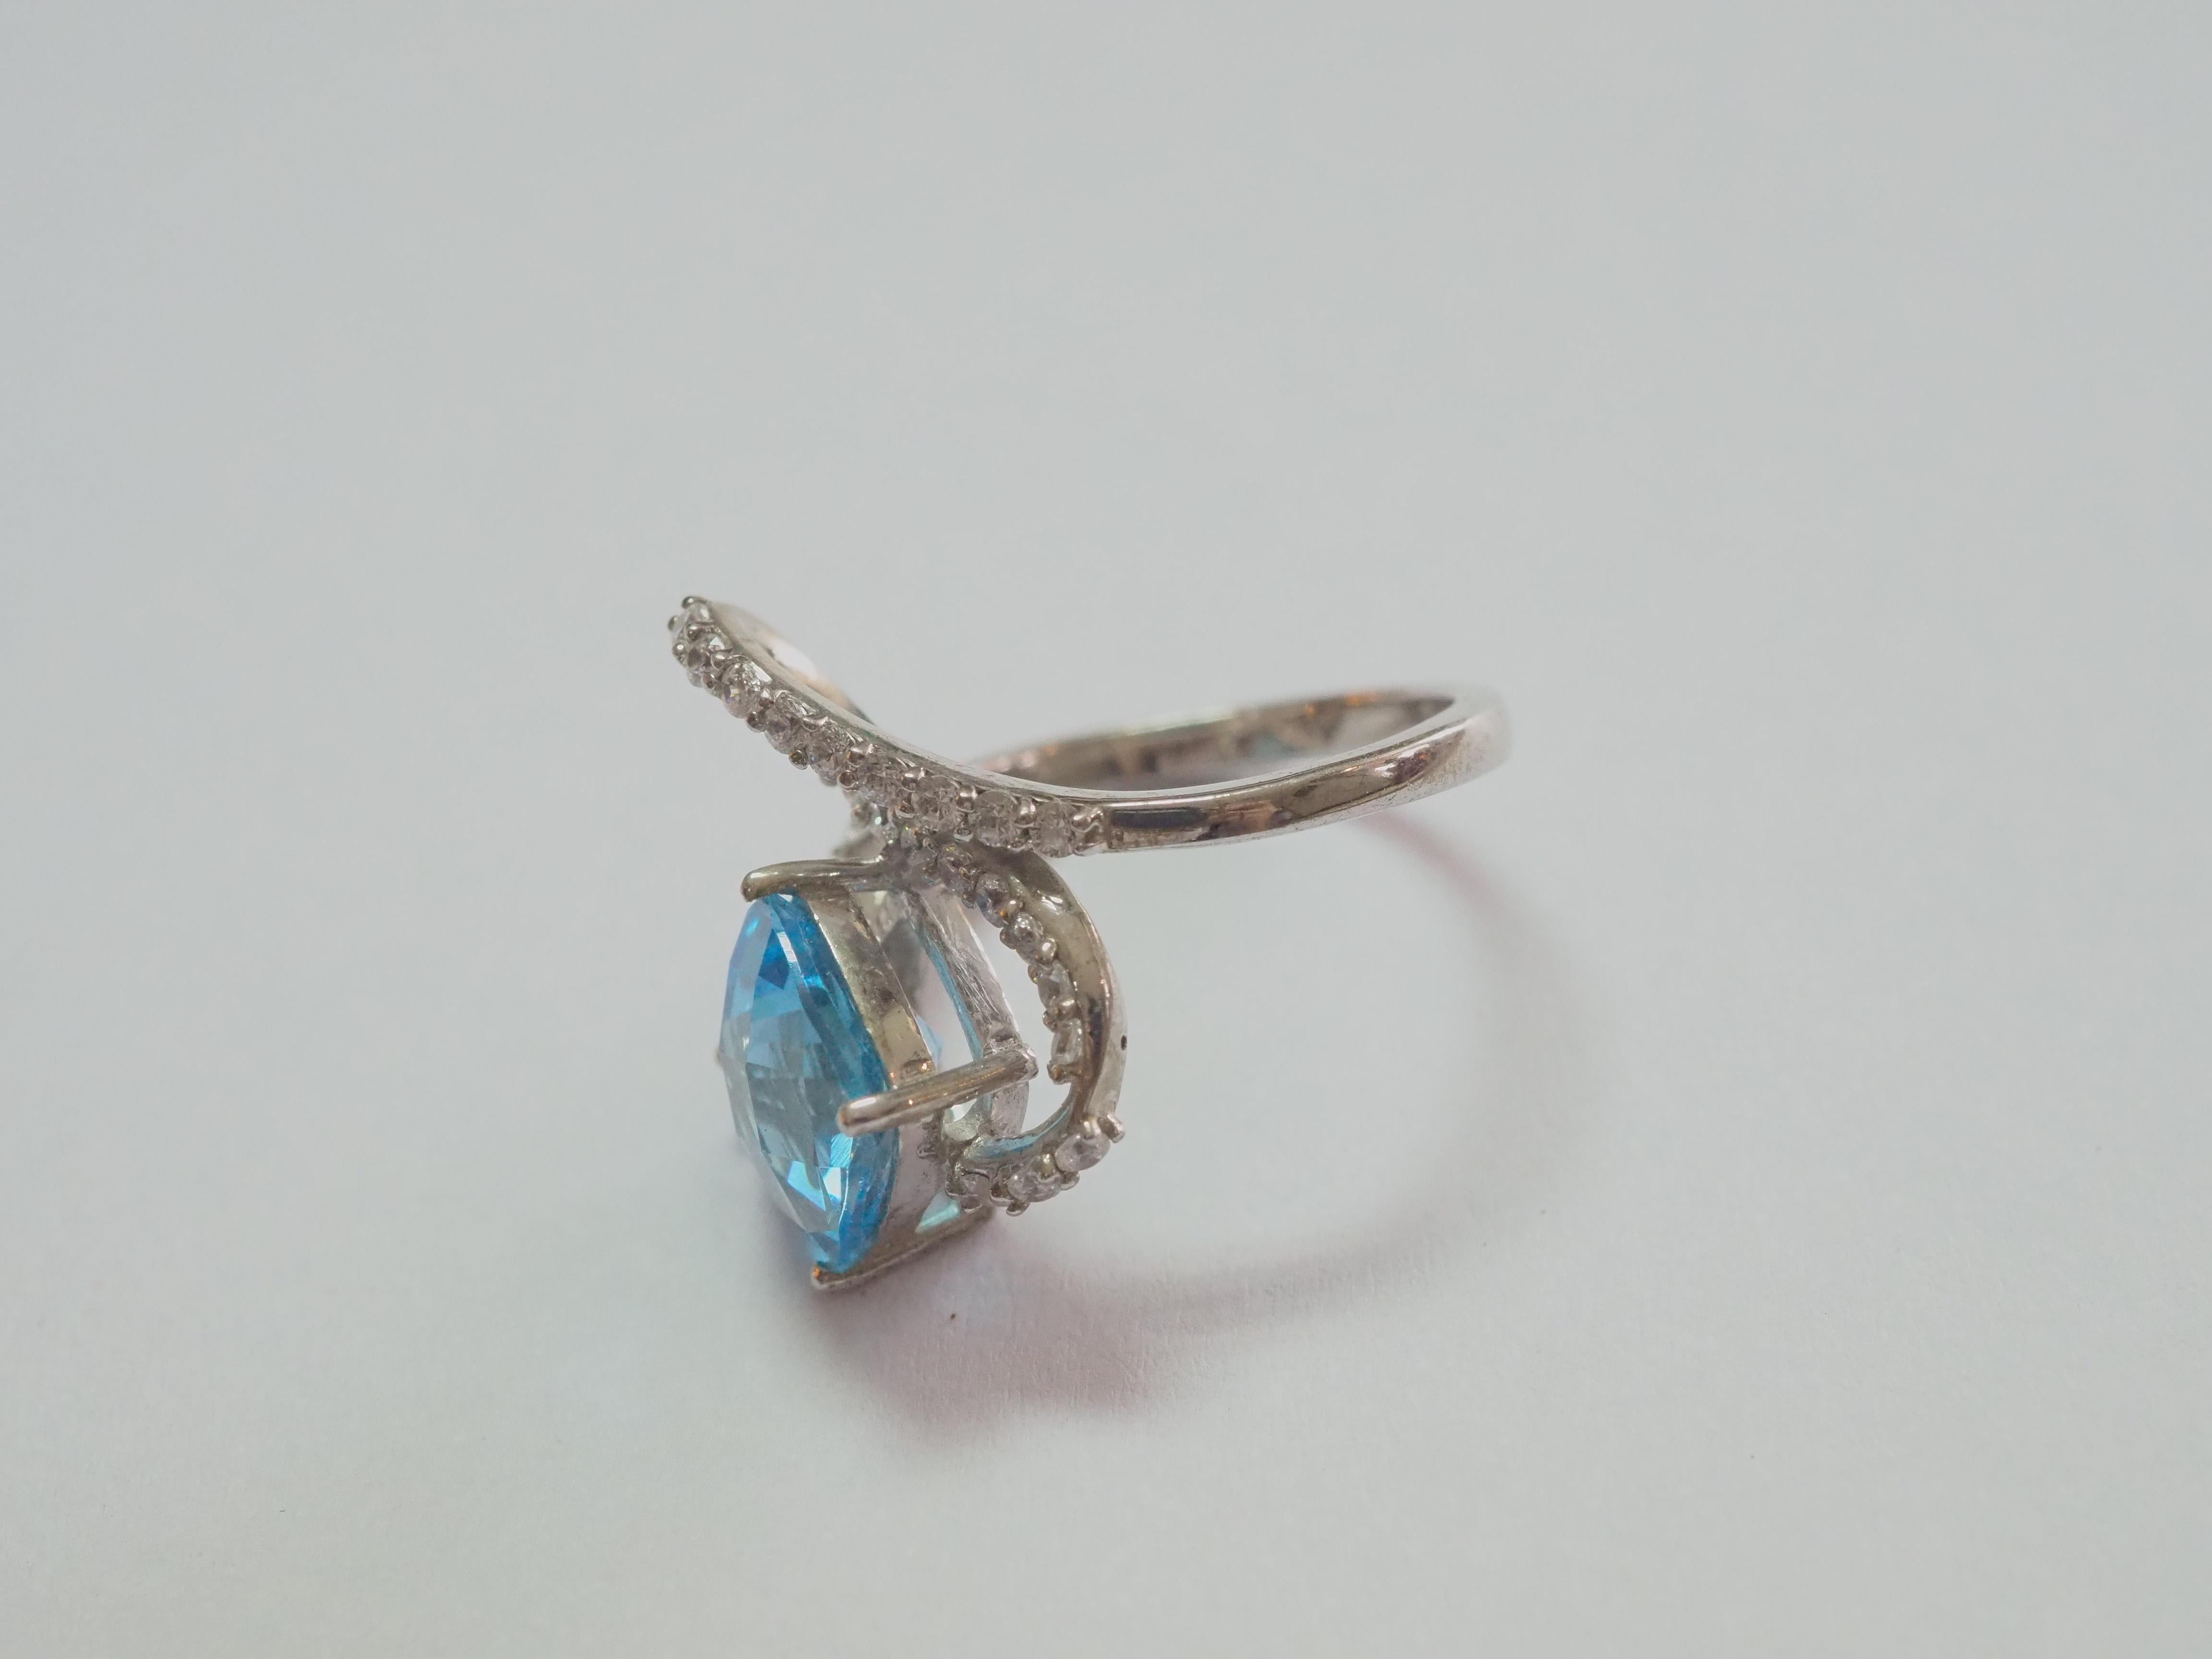 Starting at only 50!

This ring is a stunning wavy fashion ring in solid sterling silver. The ring is decorated by natural cushion blue topaz prong set as the main stone. The surrounding white stones on the band are cubic zirconia. The unique design